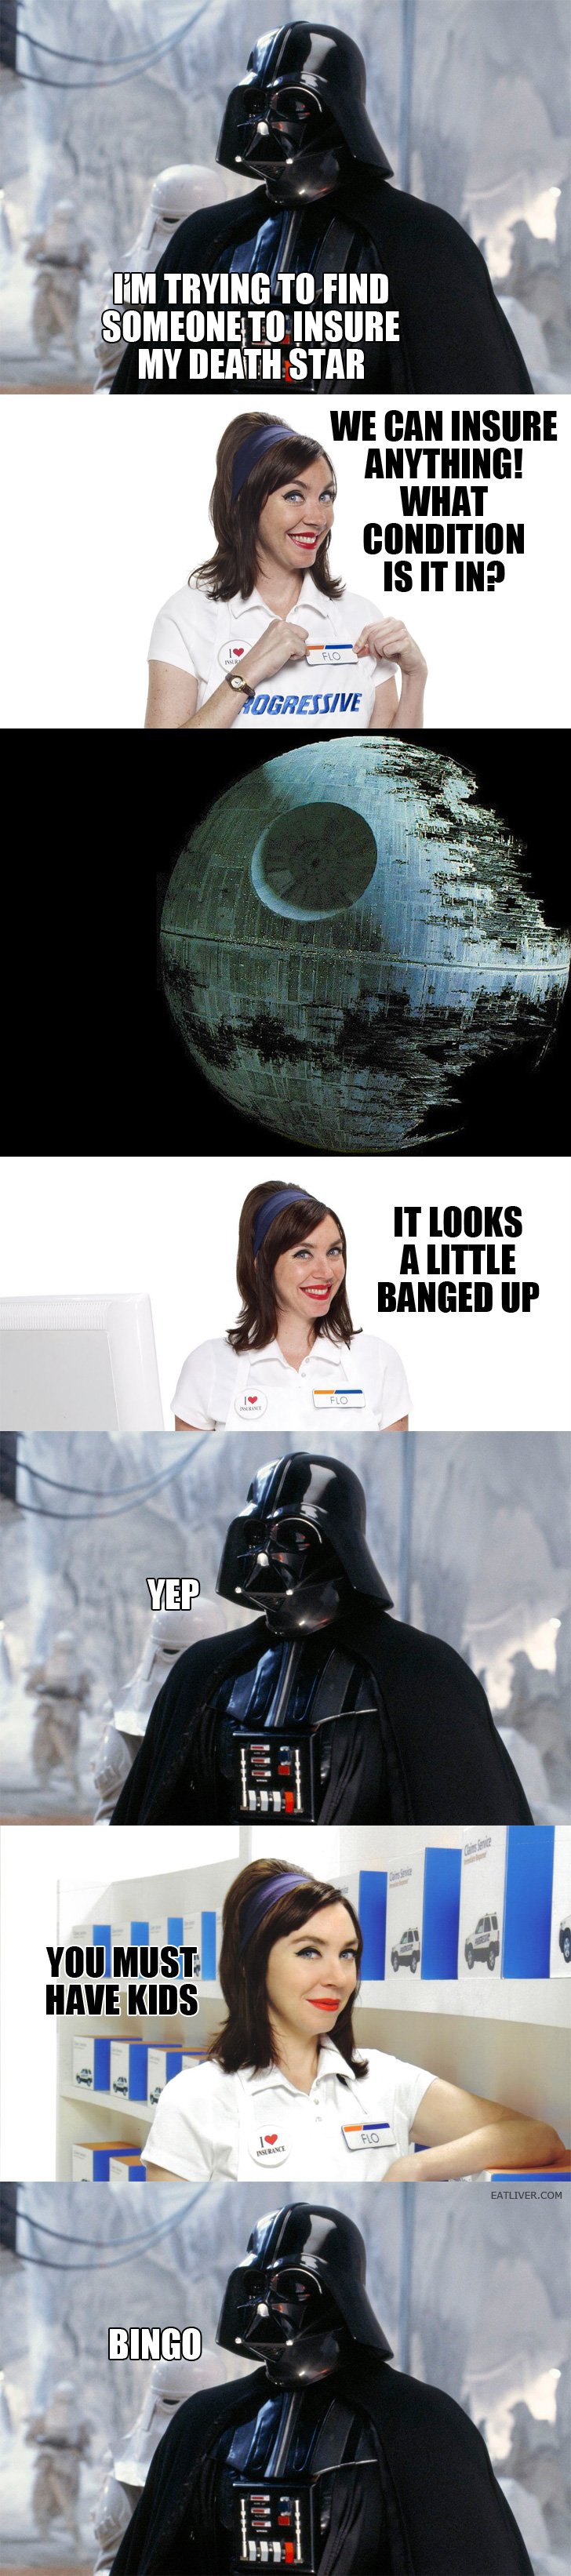 I'm trying to insure my Death Star...